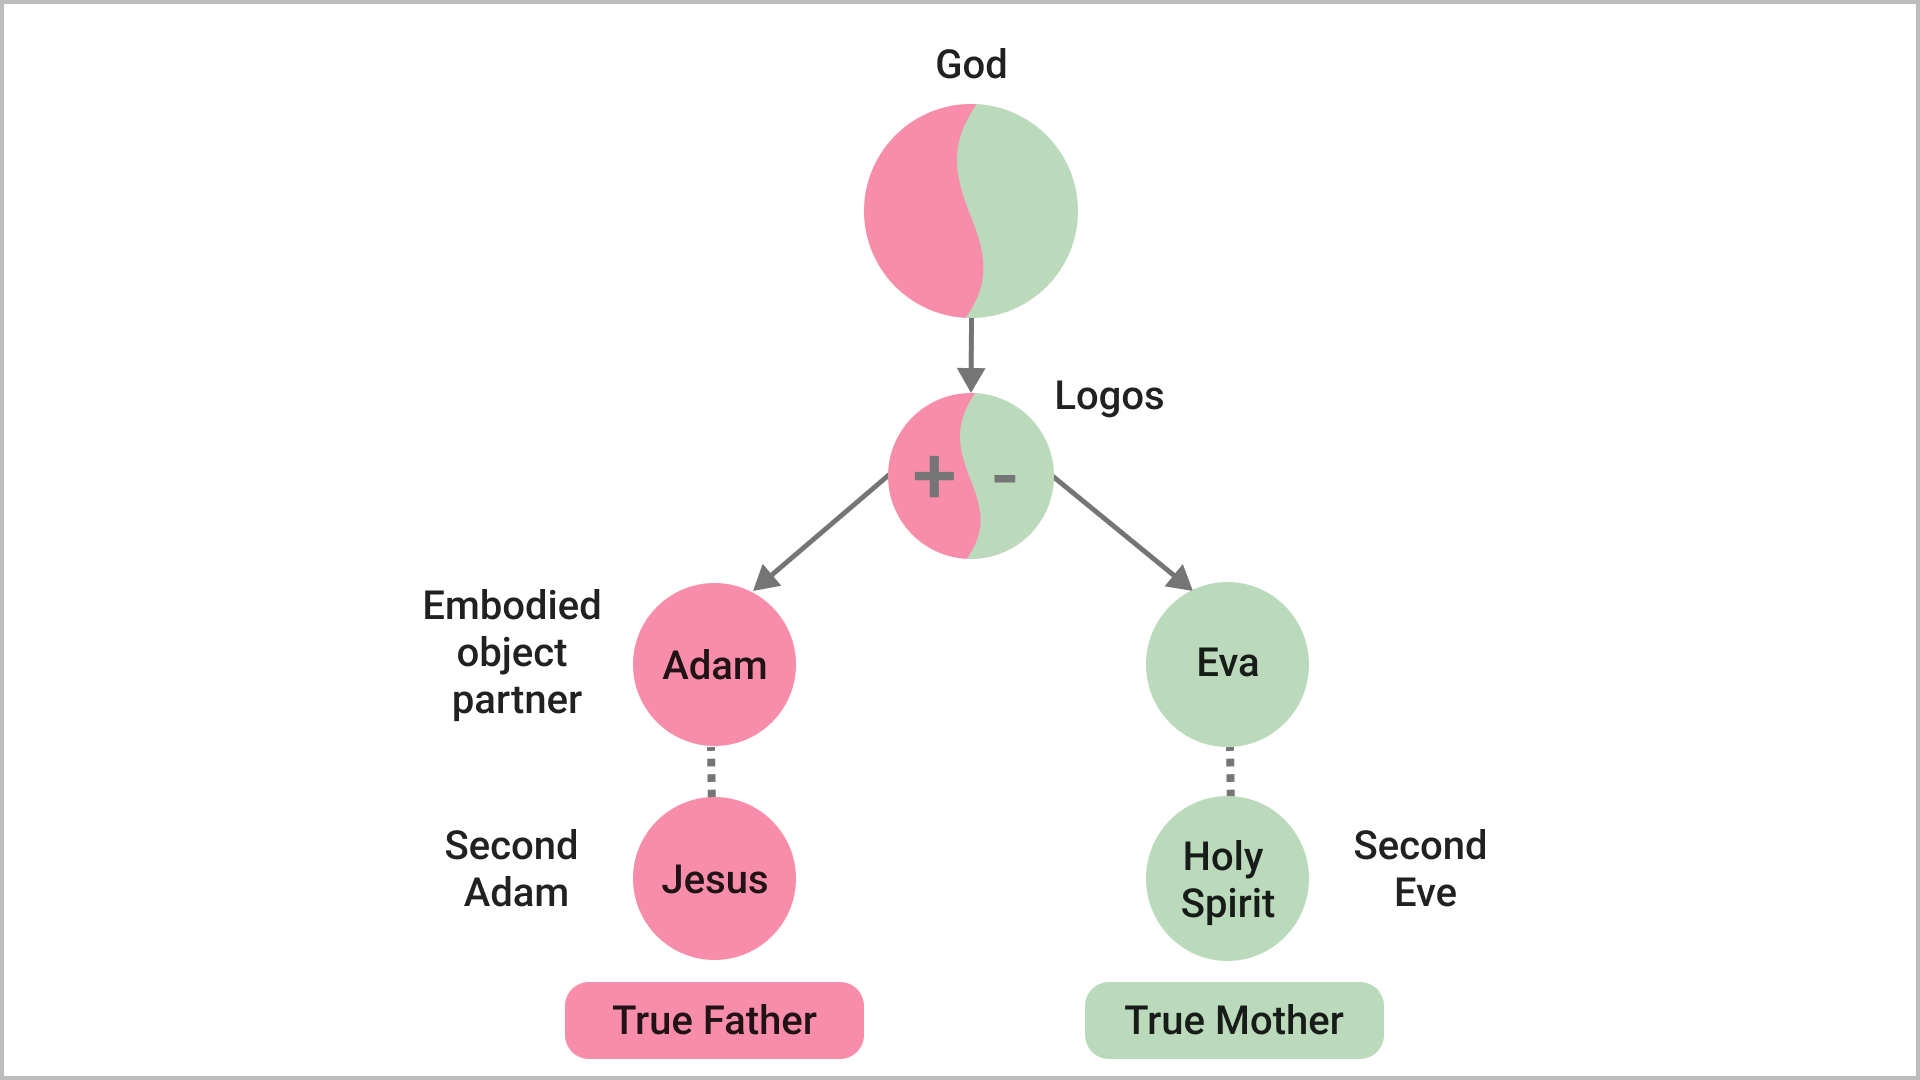 Jesus and the Holy Spirit and the Dual Characteristics of the Logos